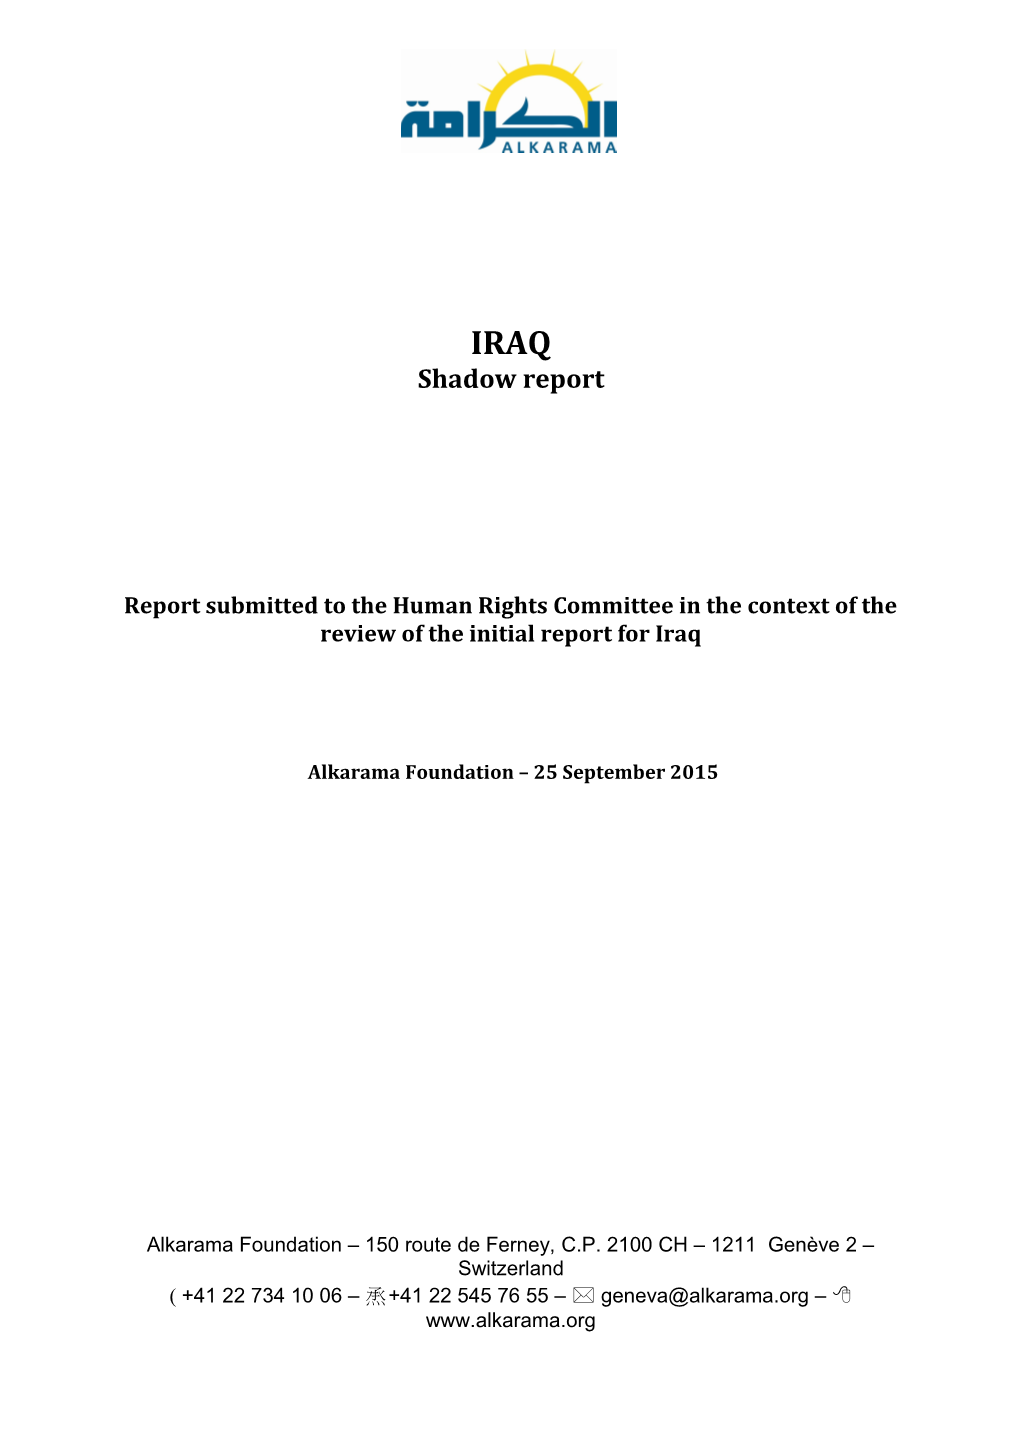 Report Submitted to the Human Rights Committee in the Context of the Review of the Initial